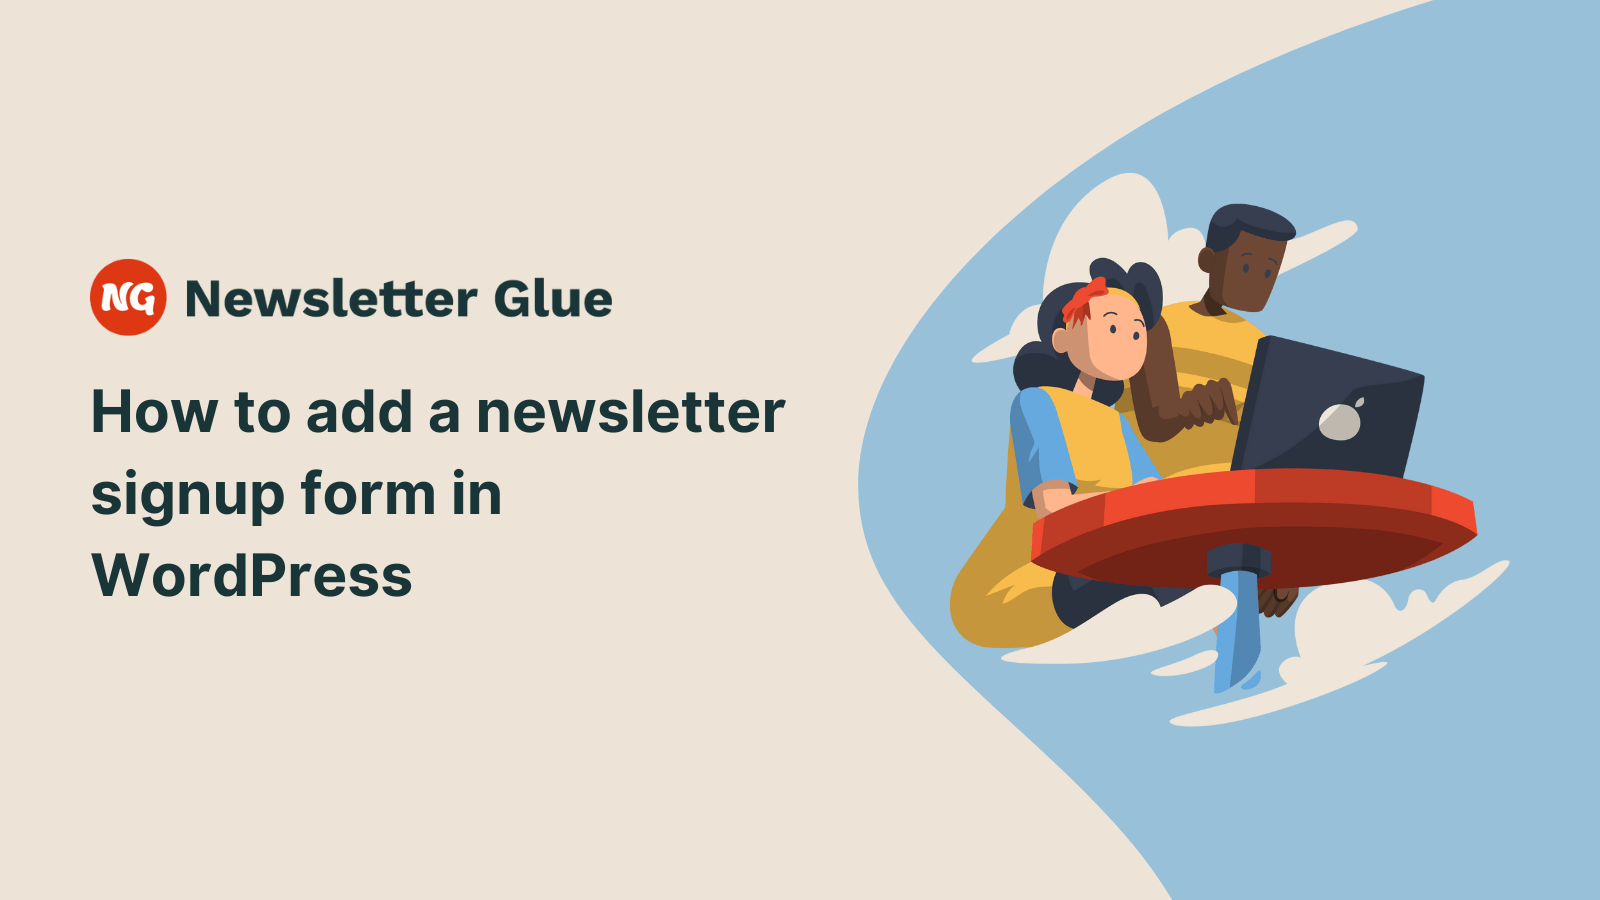 How to add a newsletter signup form in WordPress